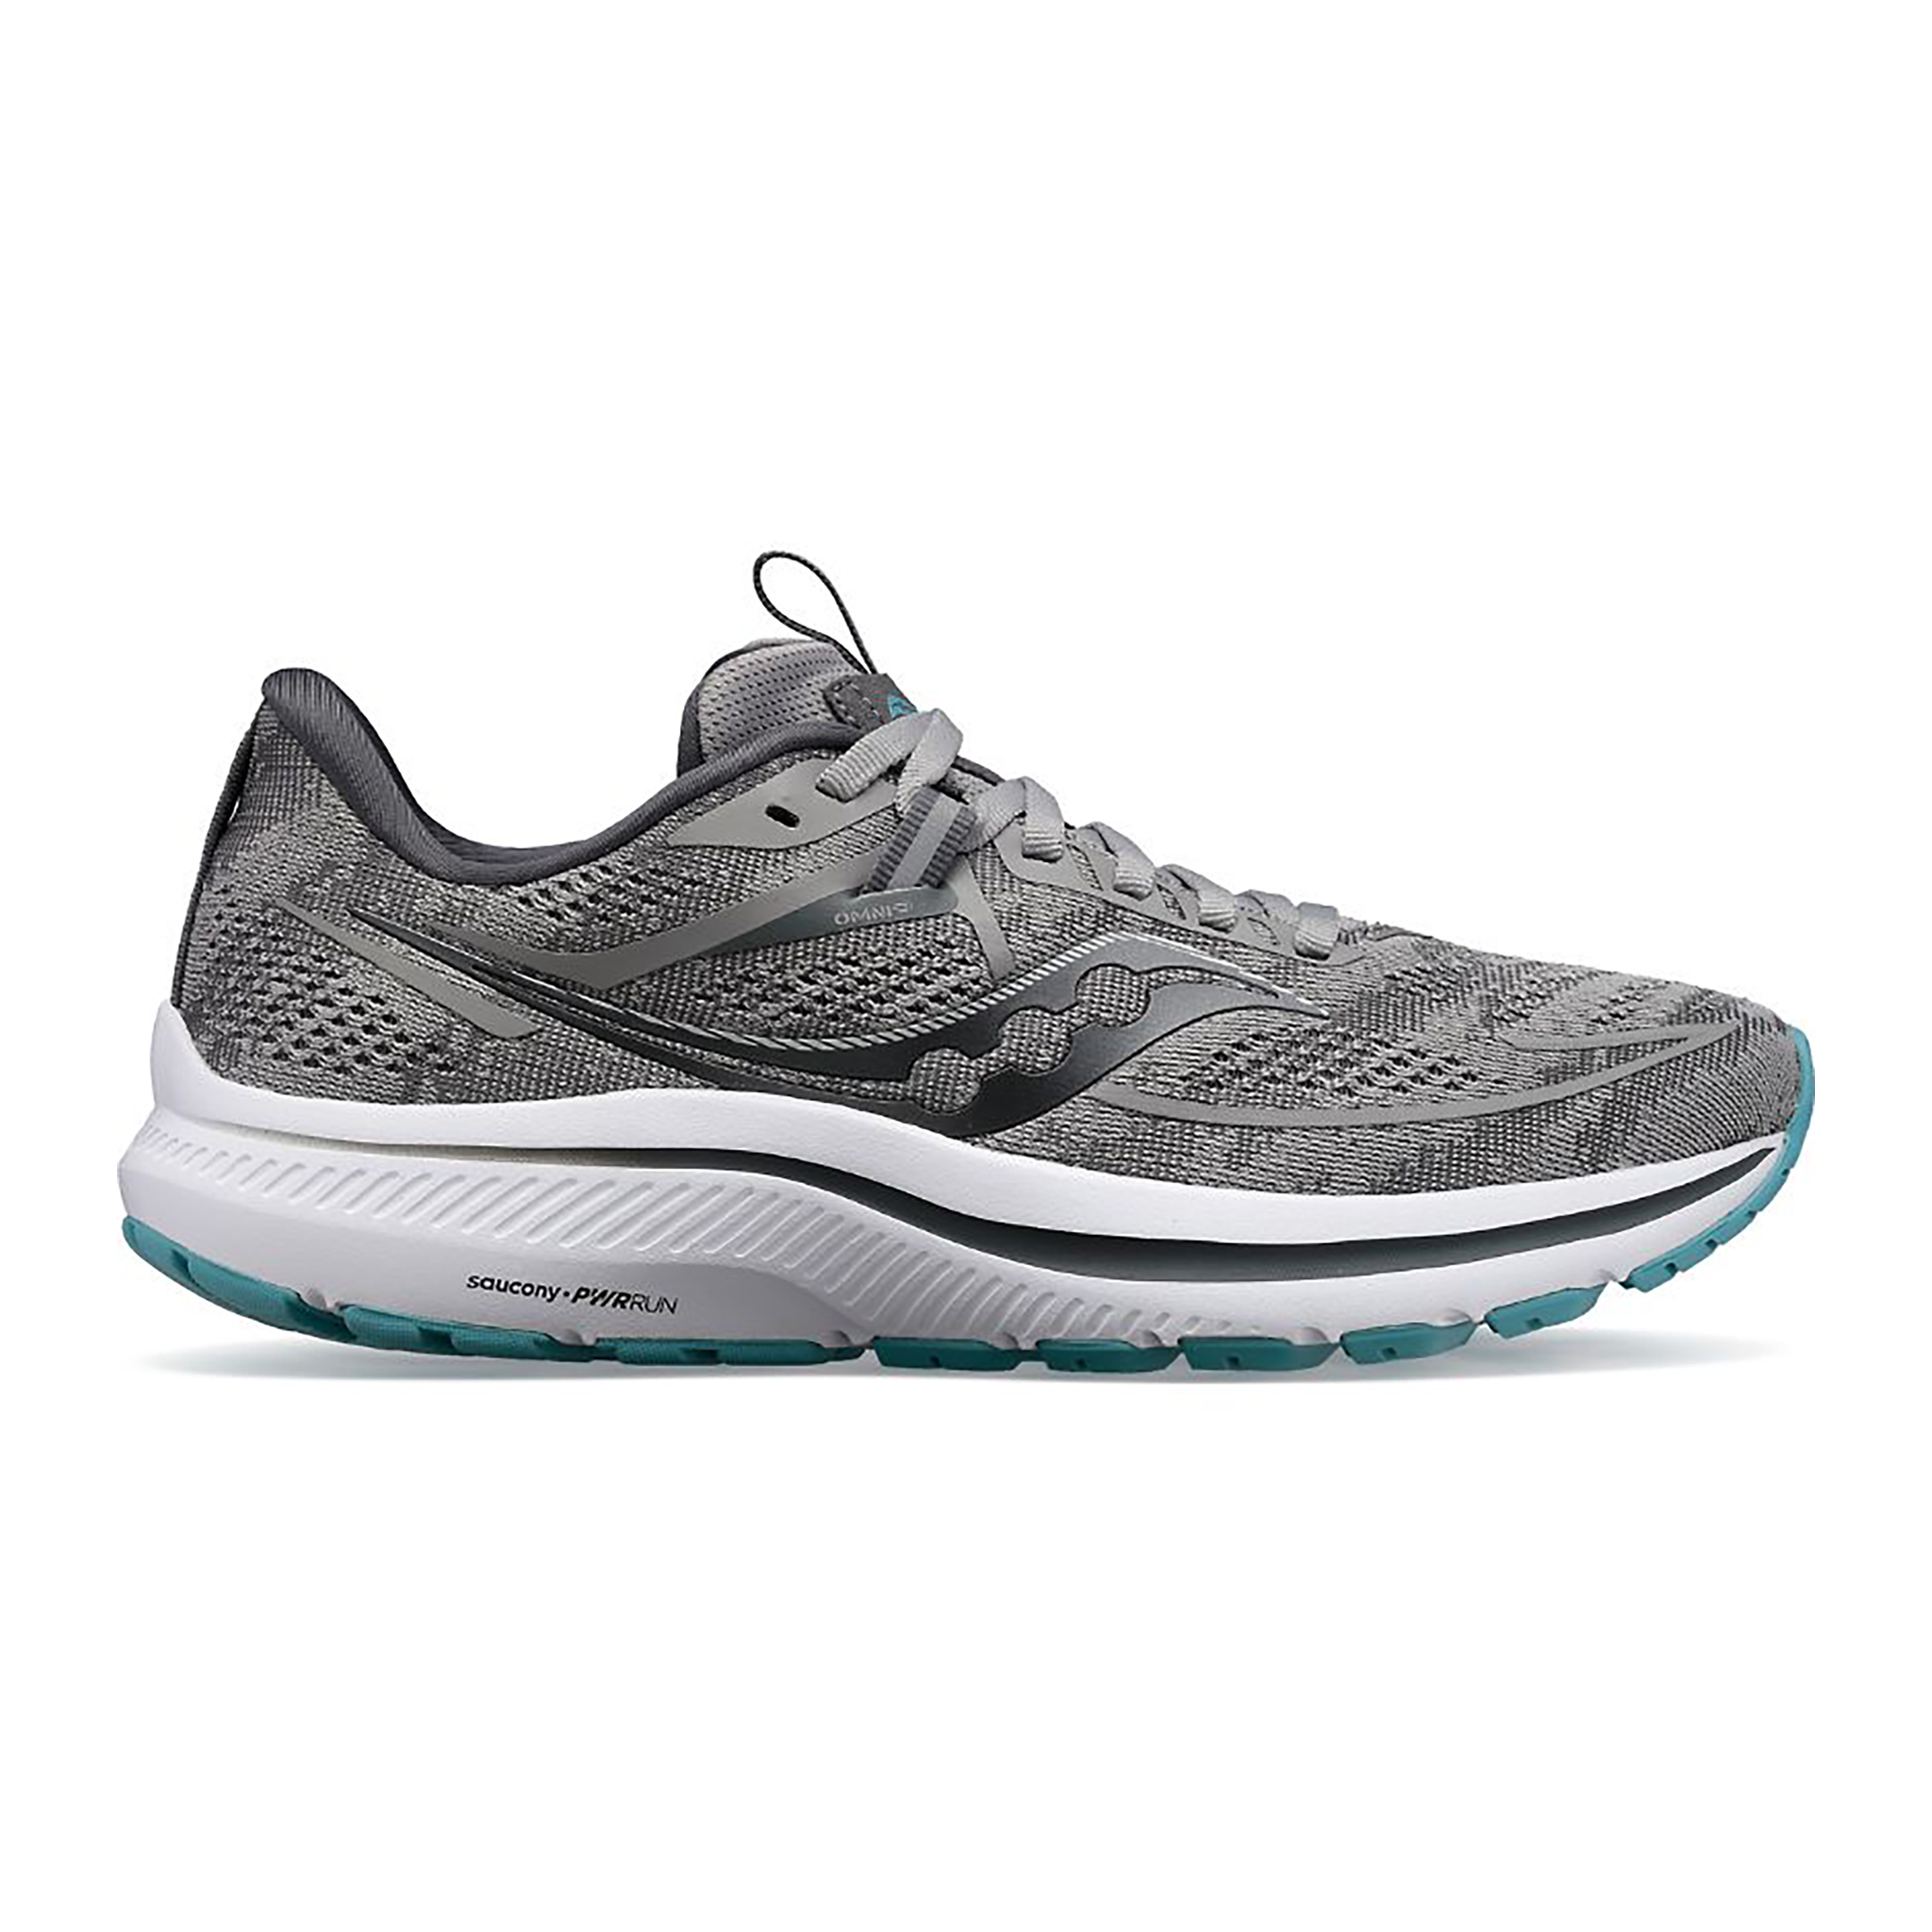 WOMEN'S SAUCONY FORTIFY CROP  Performance Running Outfitters